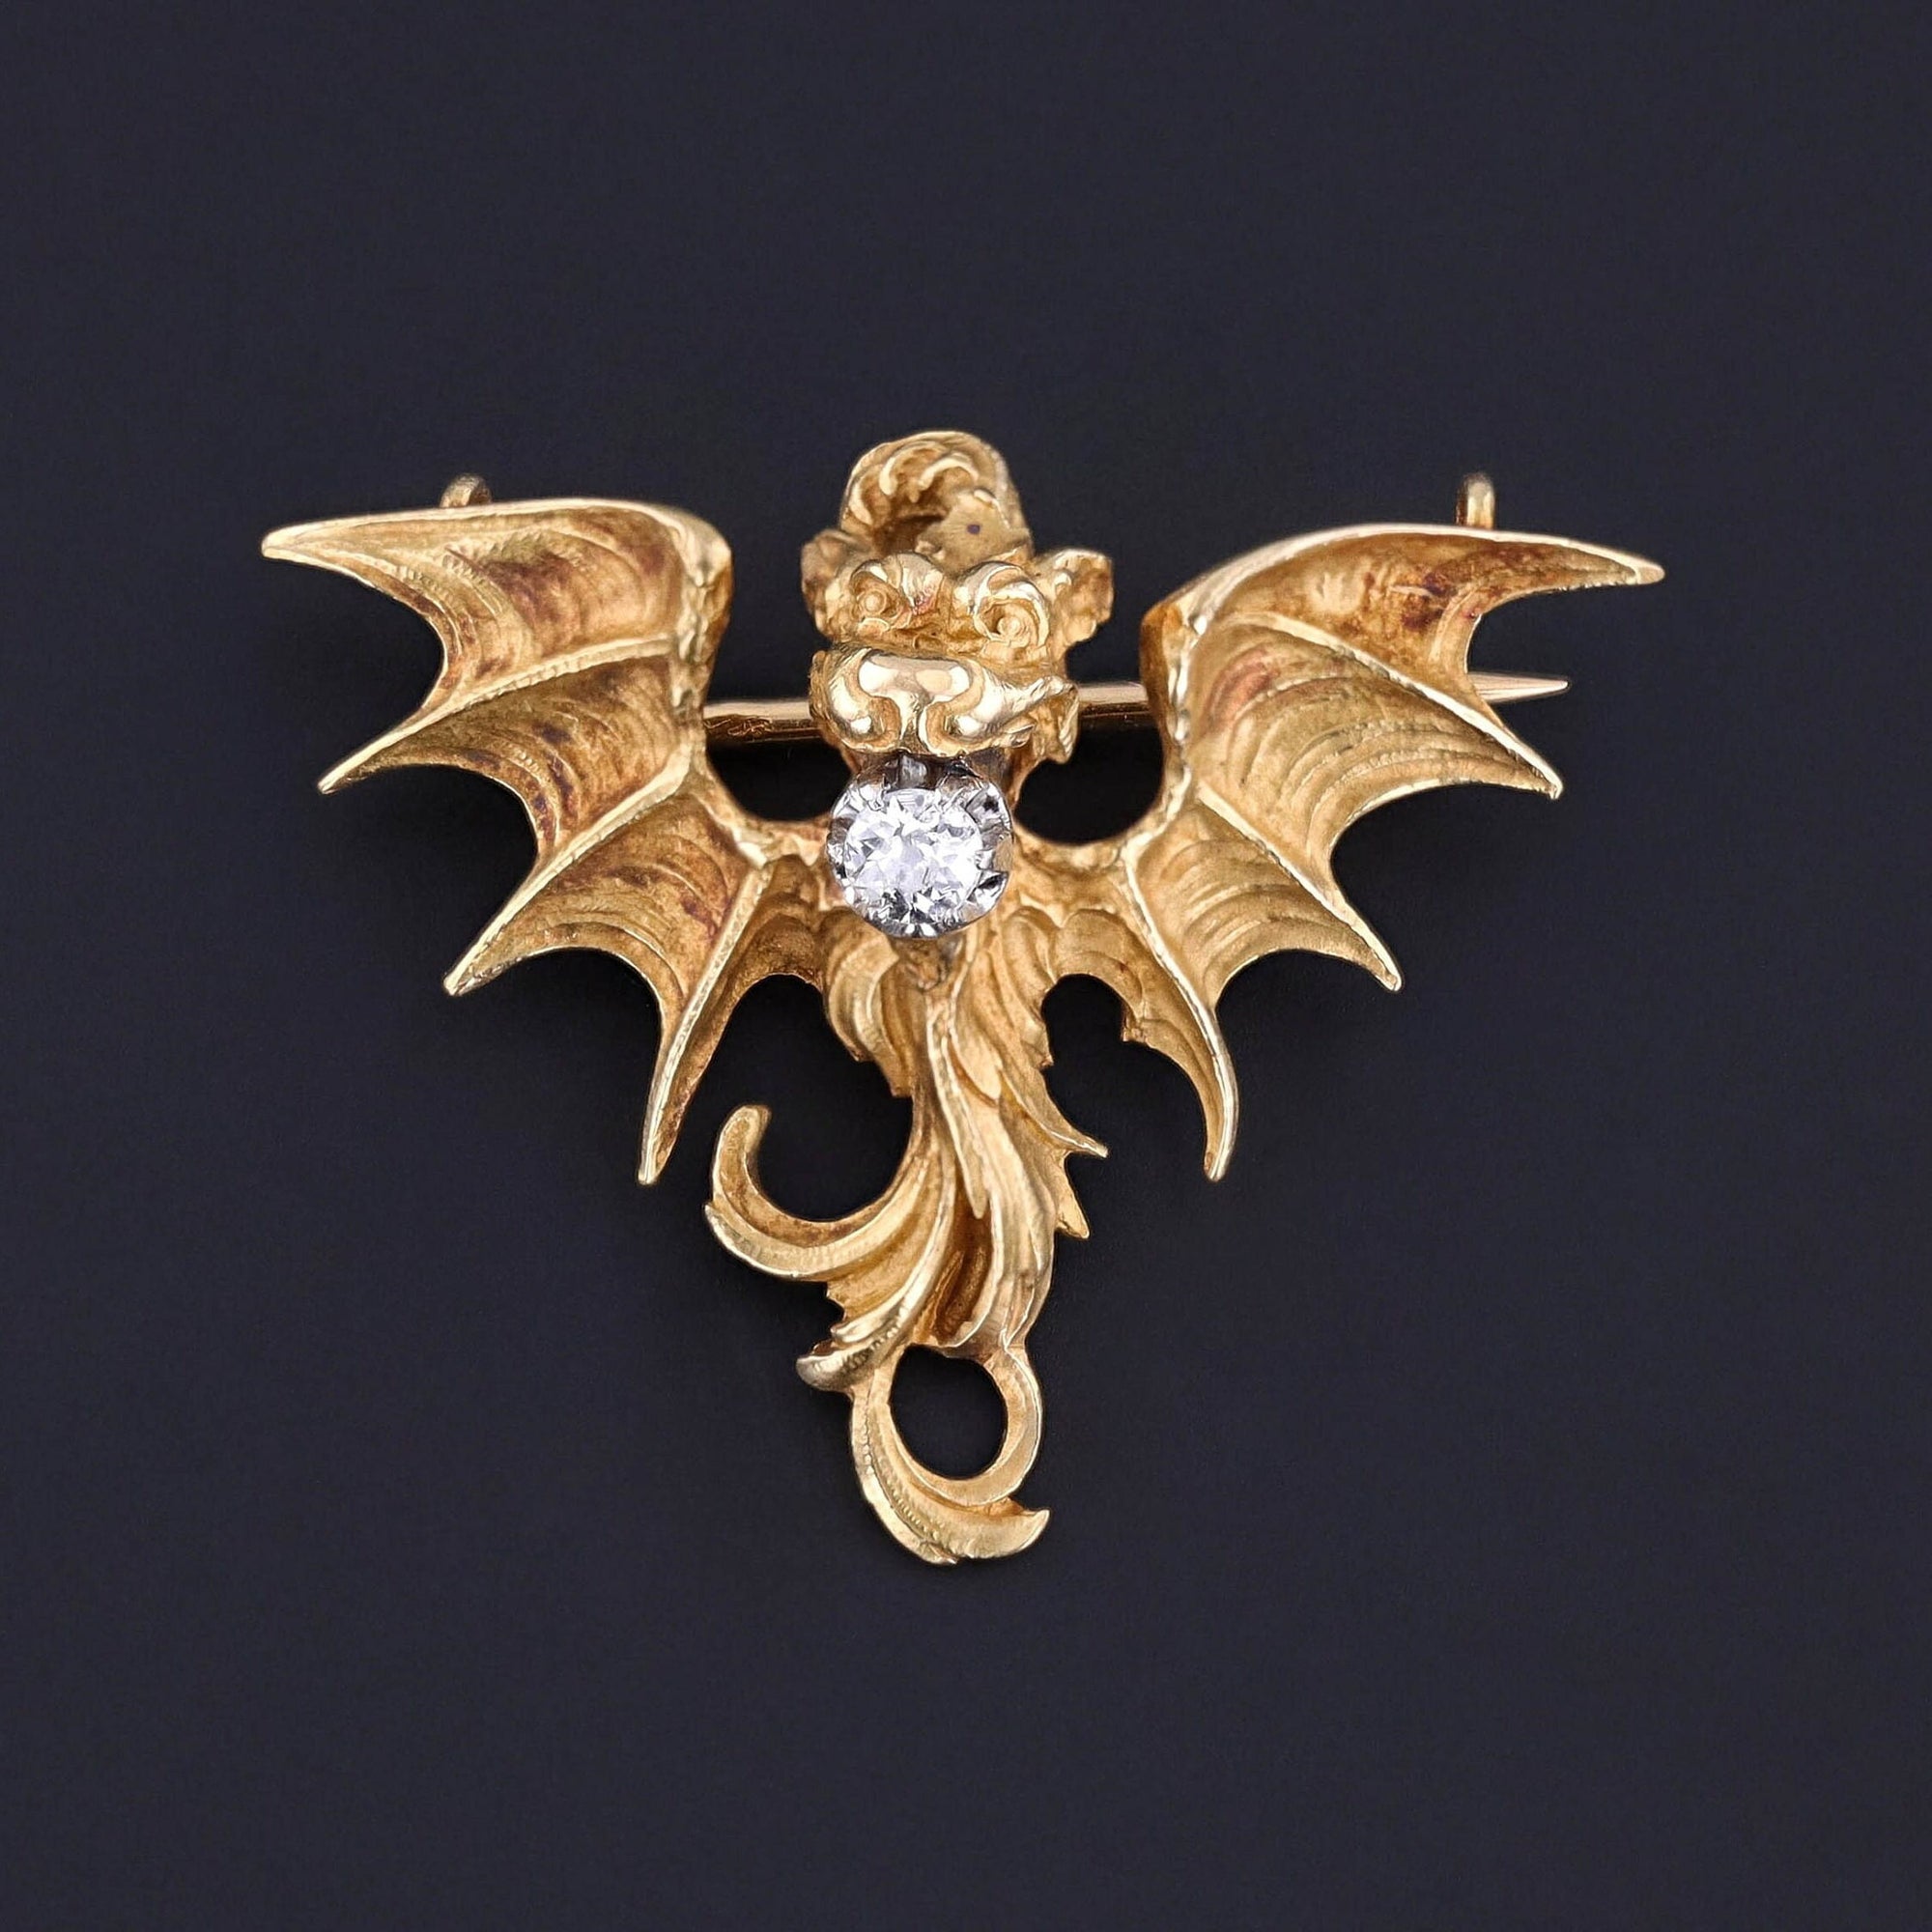 Antique French Art Nouveau Dragon Brooch of 18k Gold